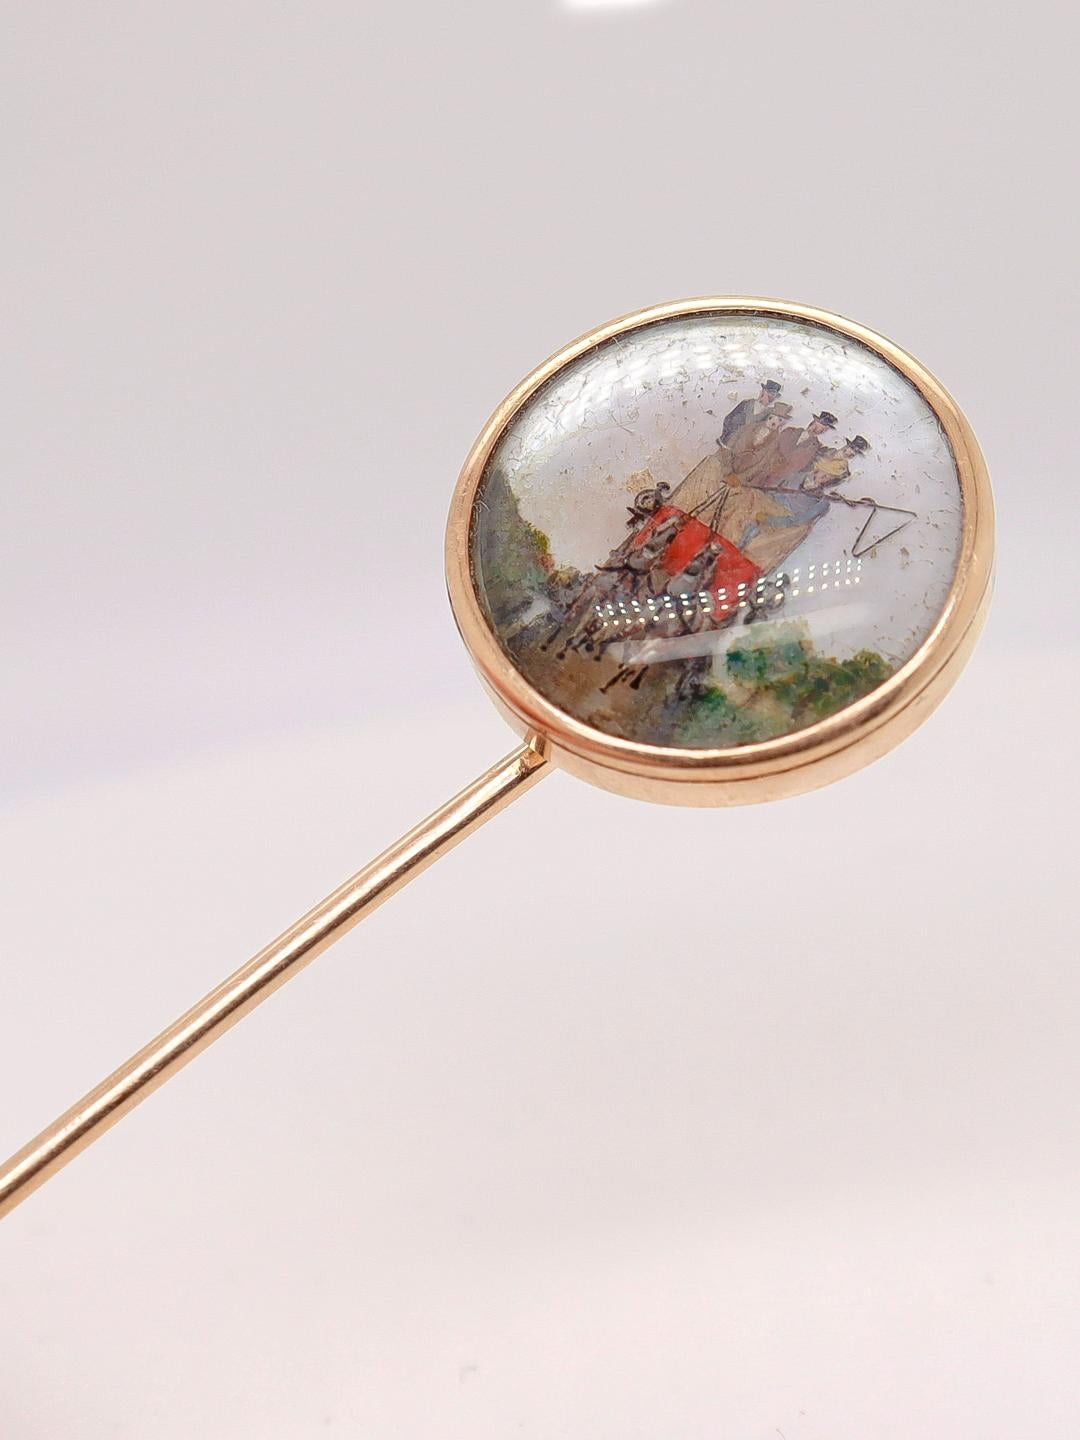 Large Antique Signed 14k Gold Essex Crystal Stickpin of a Stagecoach or Carriage In Fair Condition For Sale In Philadelphia, PA